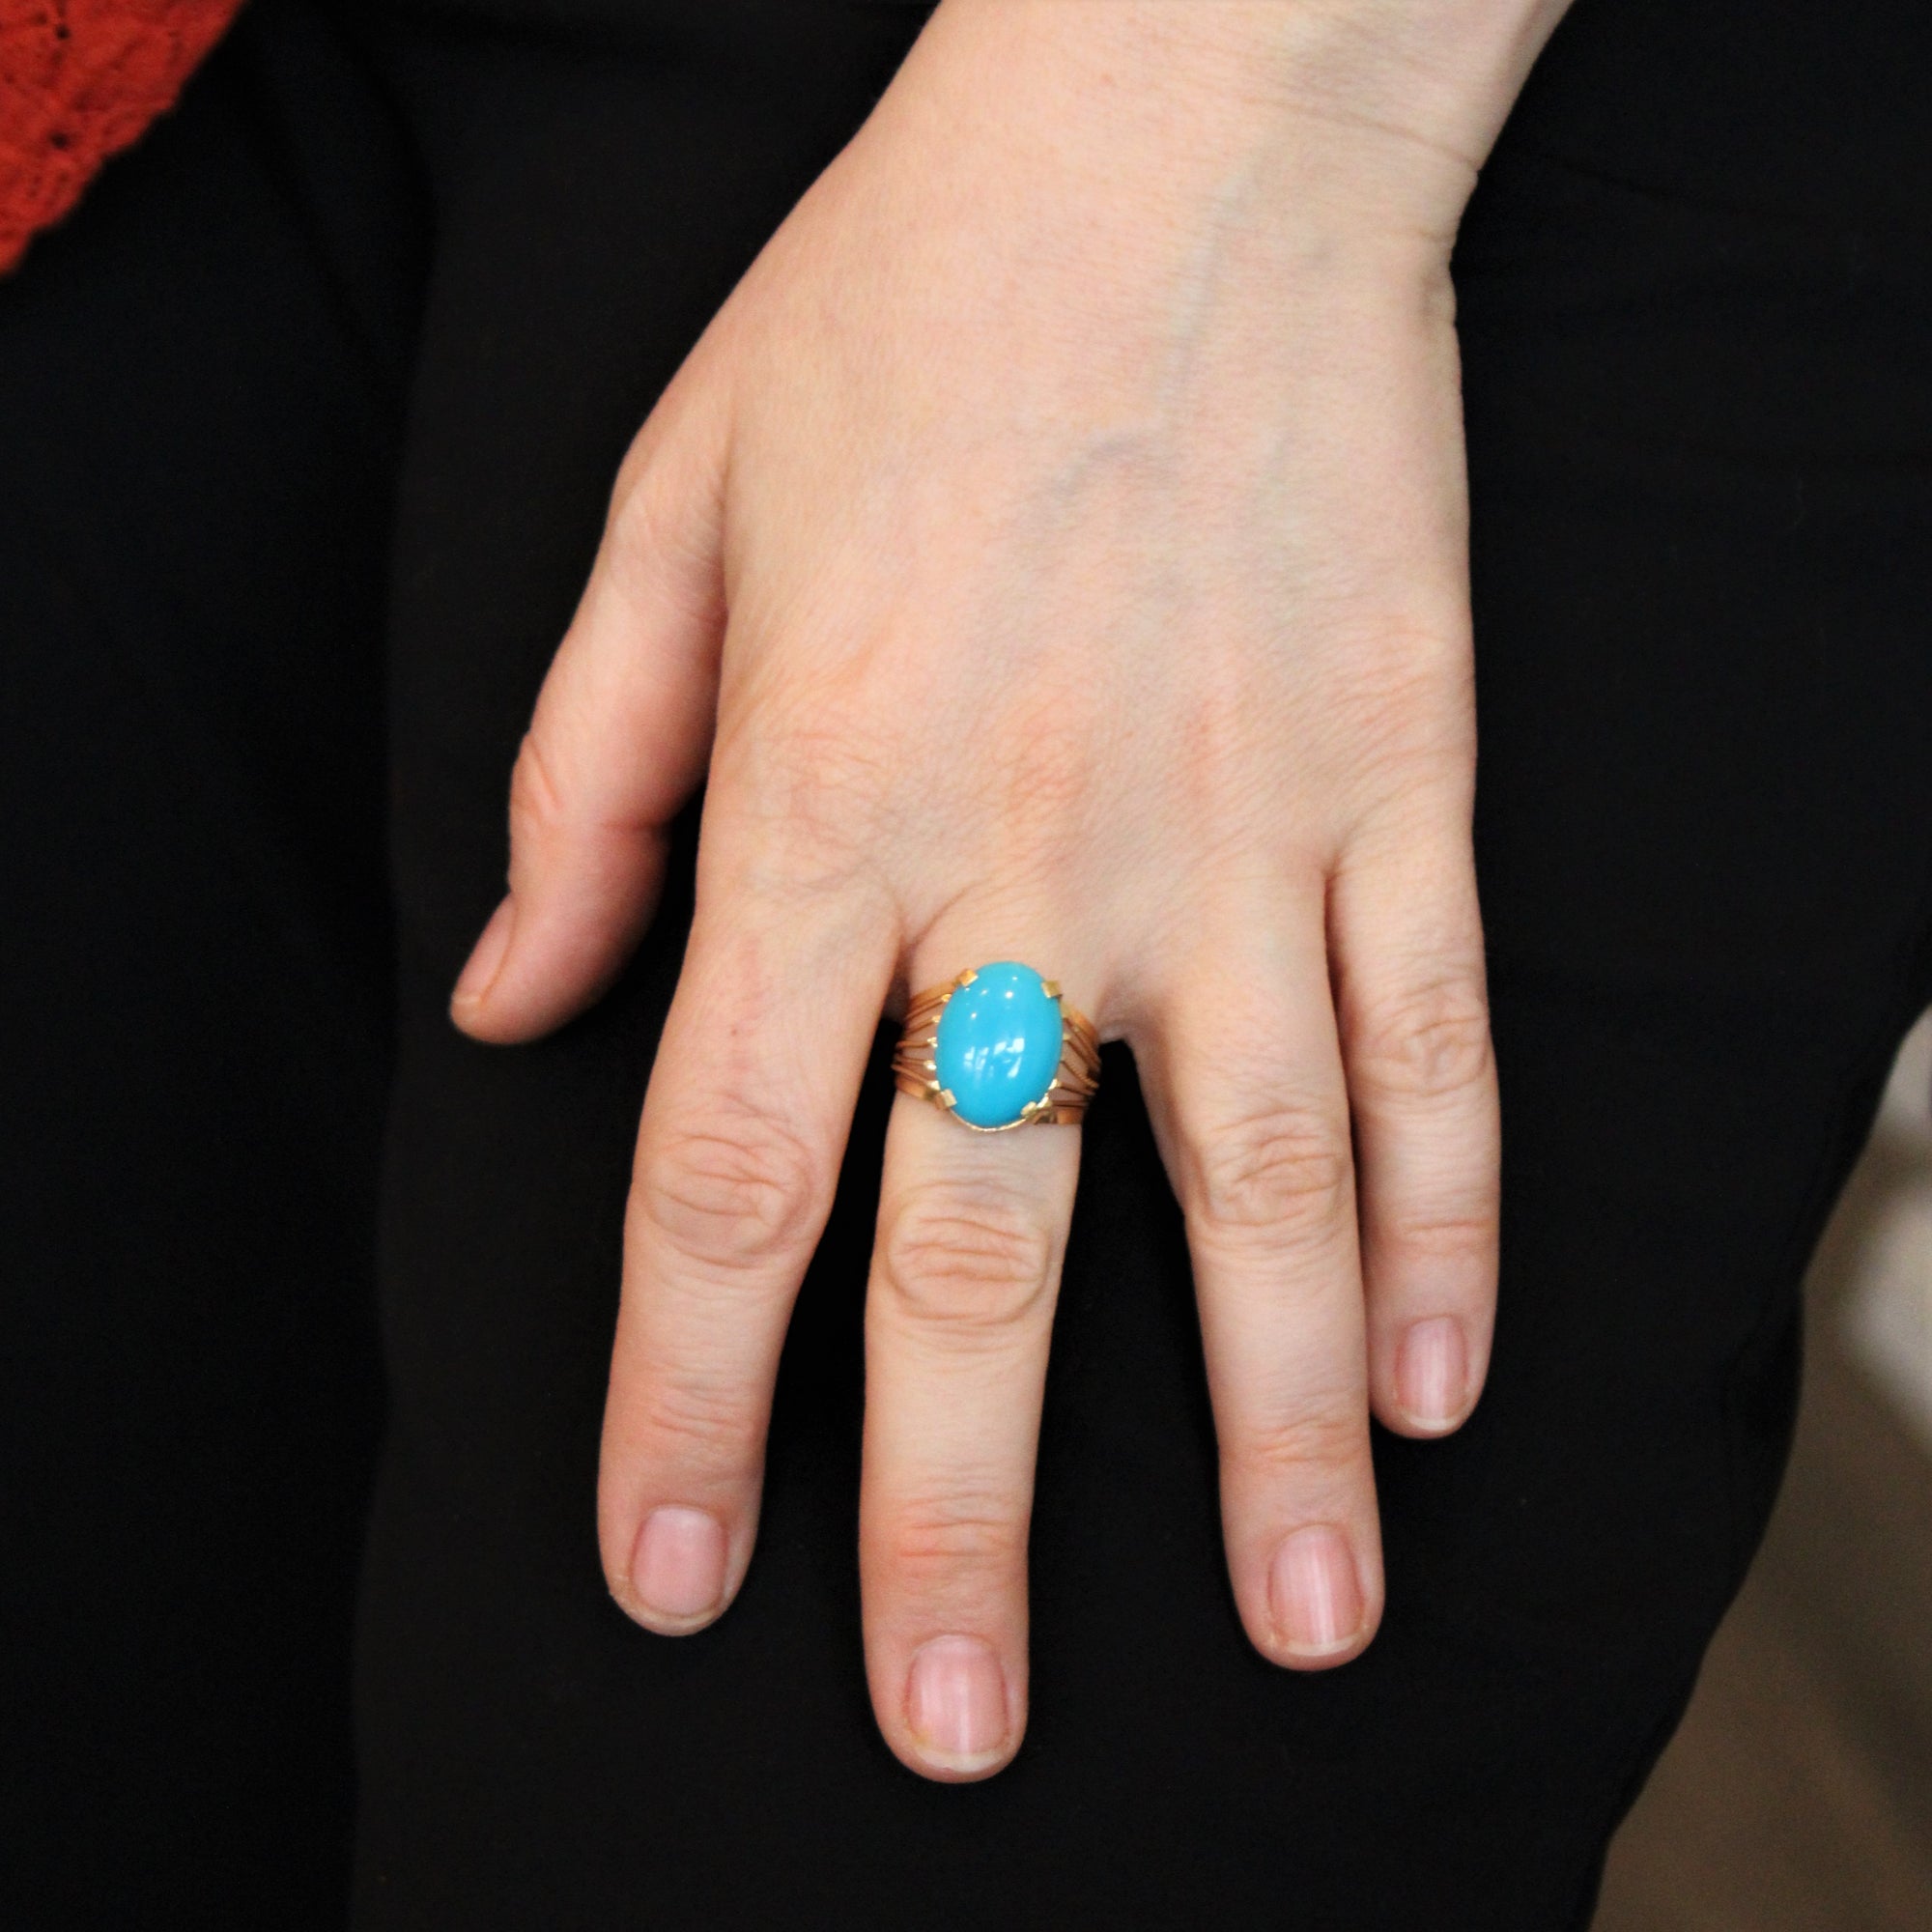 Turquoise Cocktail Ring | 8.20ct | SZ 8.75 |